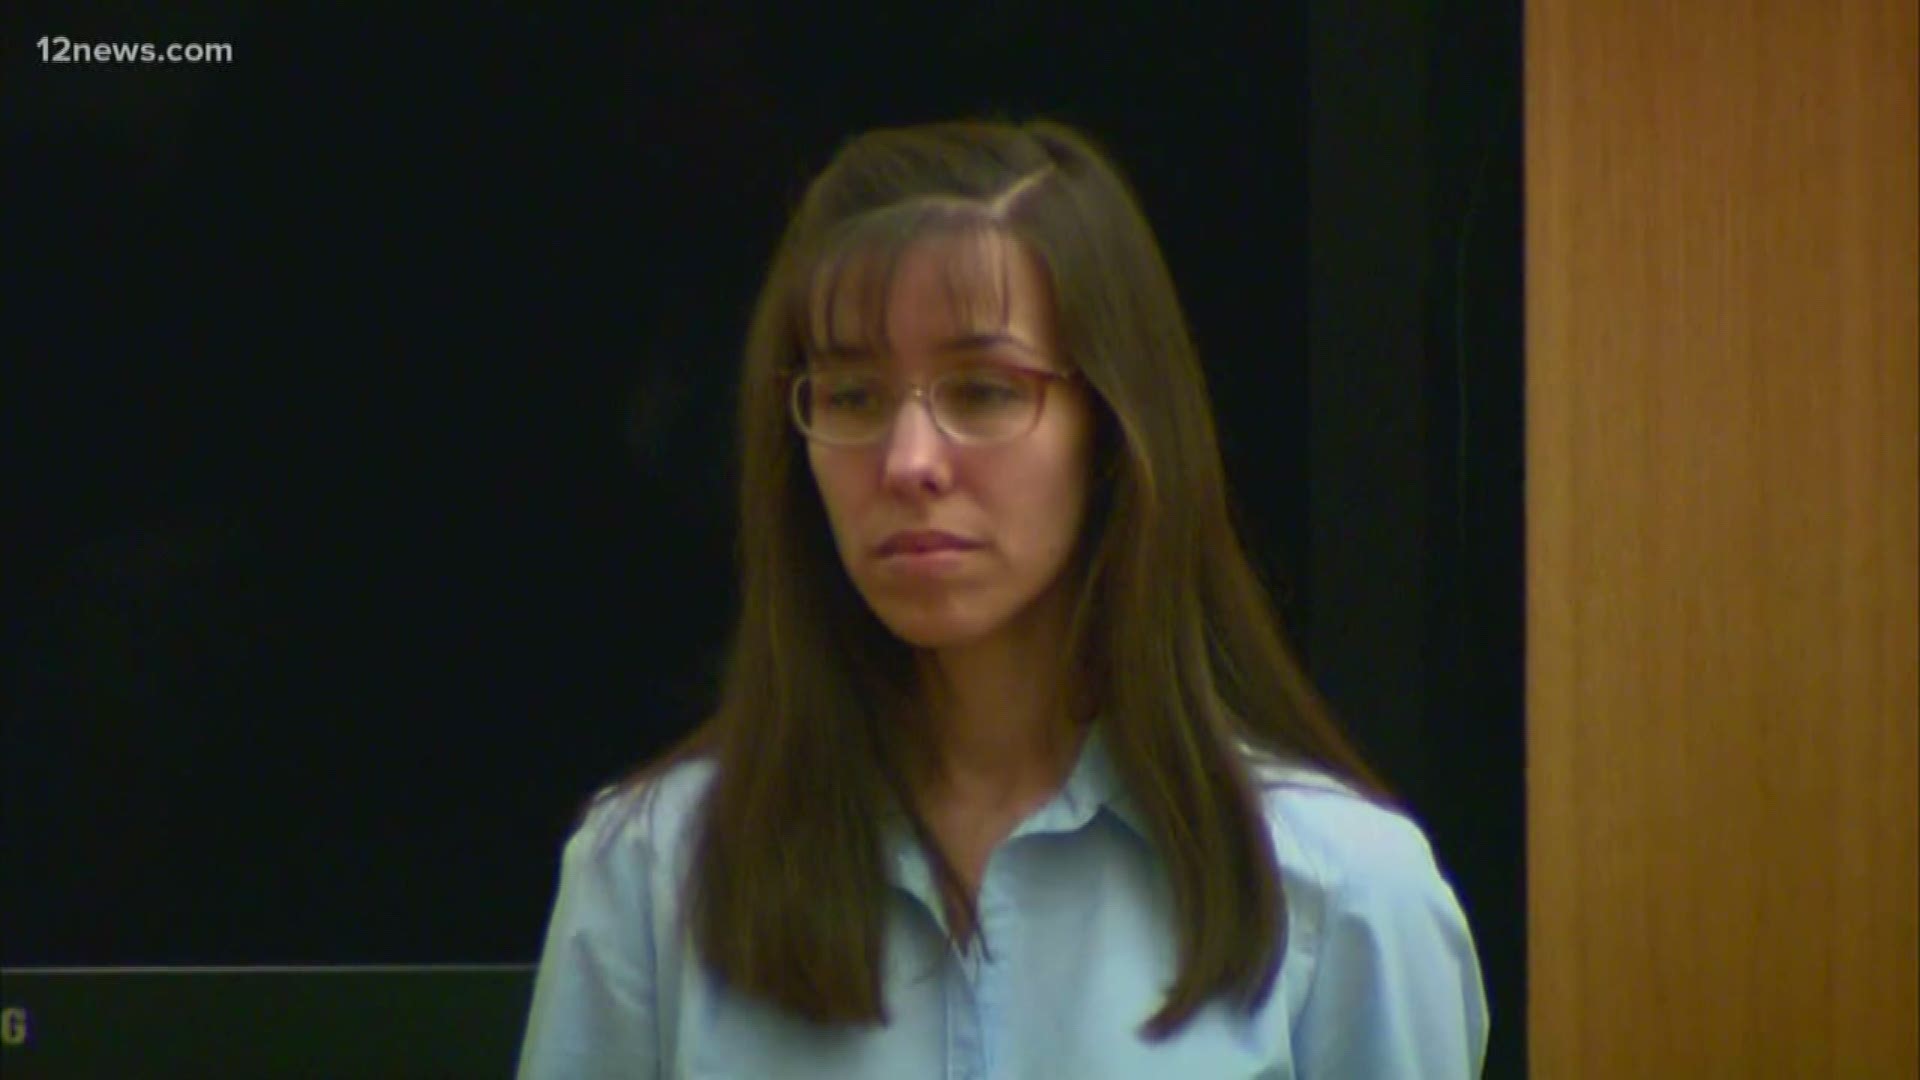 Jodi Arias swore she will appeal her conviction, and she is. But she doesn't want anyone to know what she thinks was wrong with the trial.